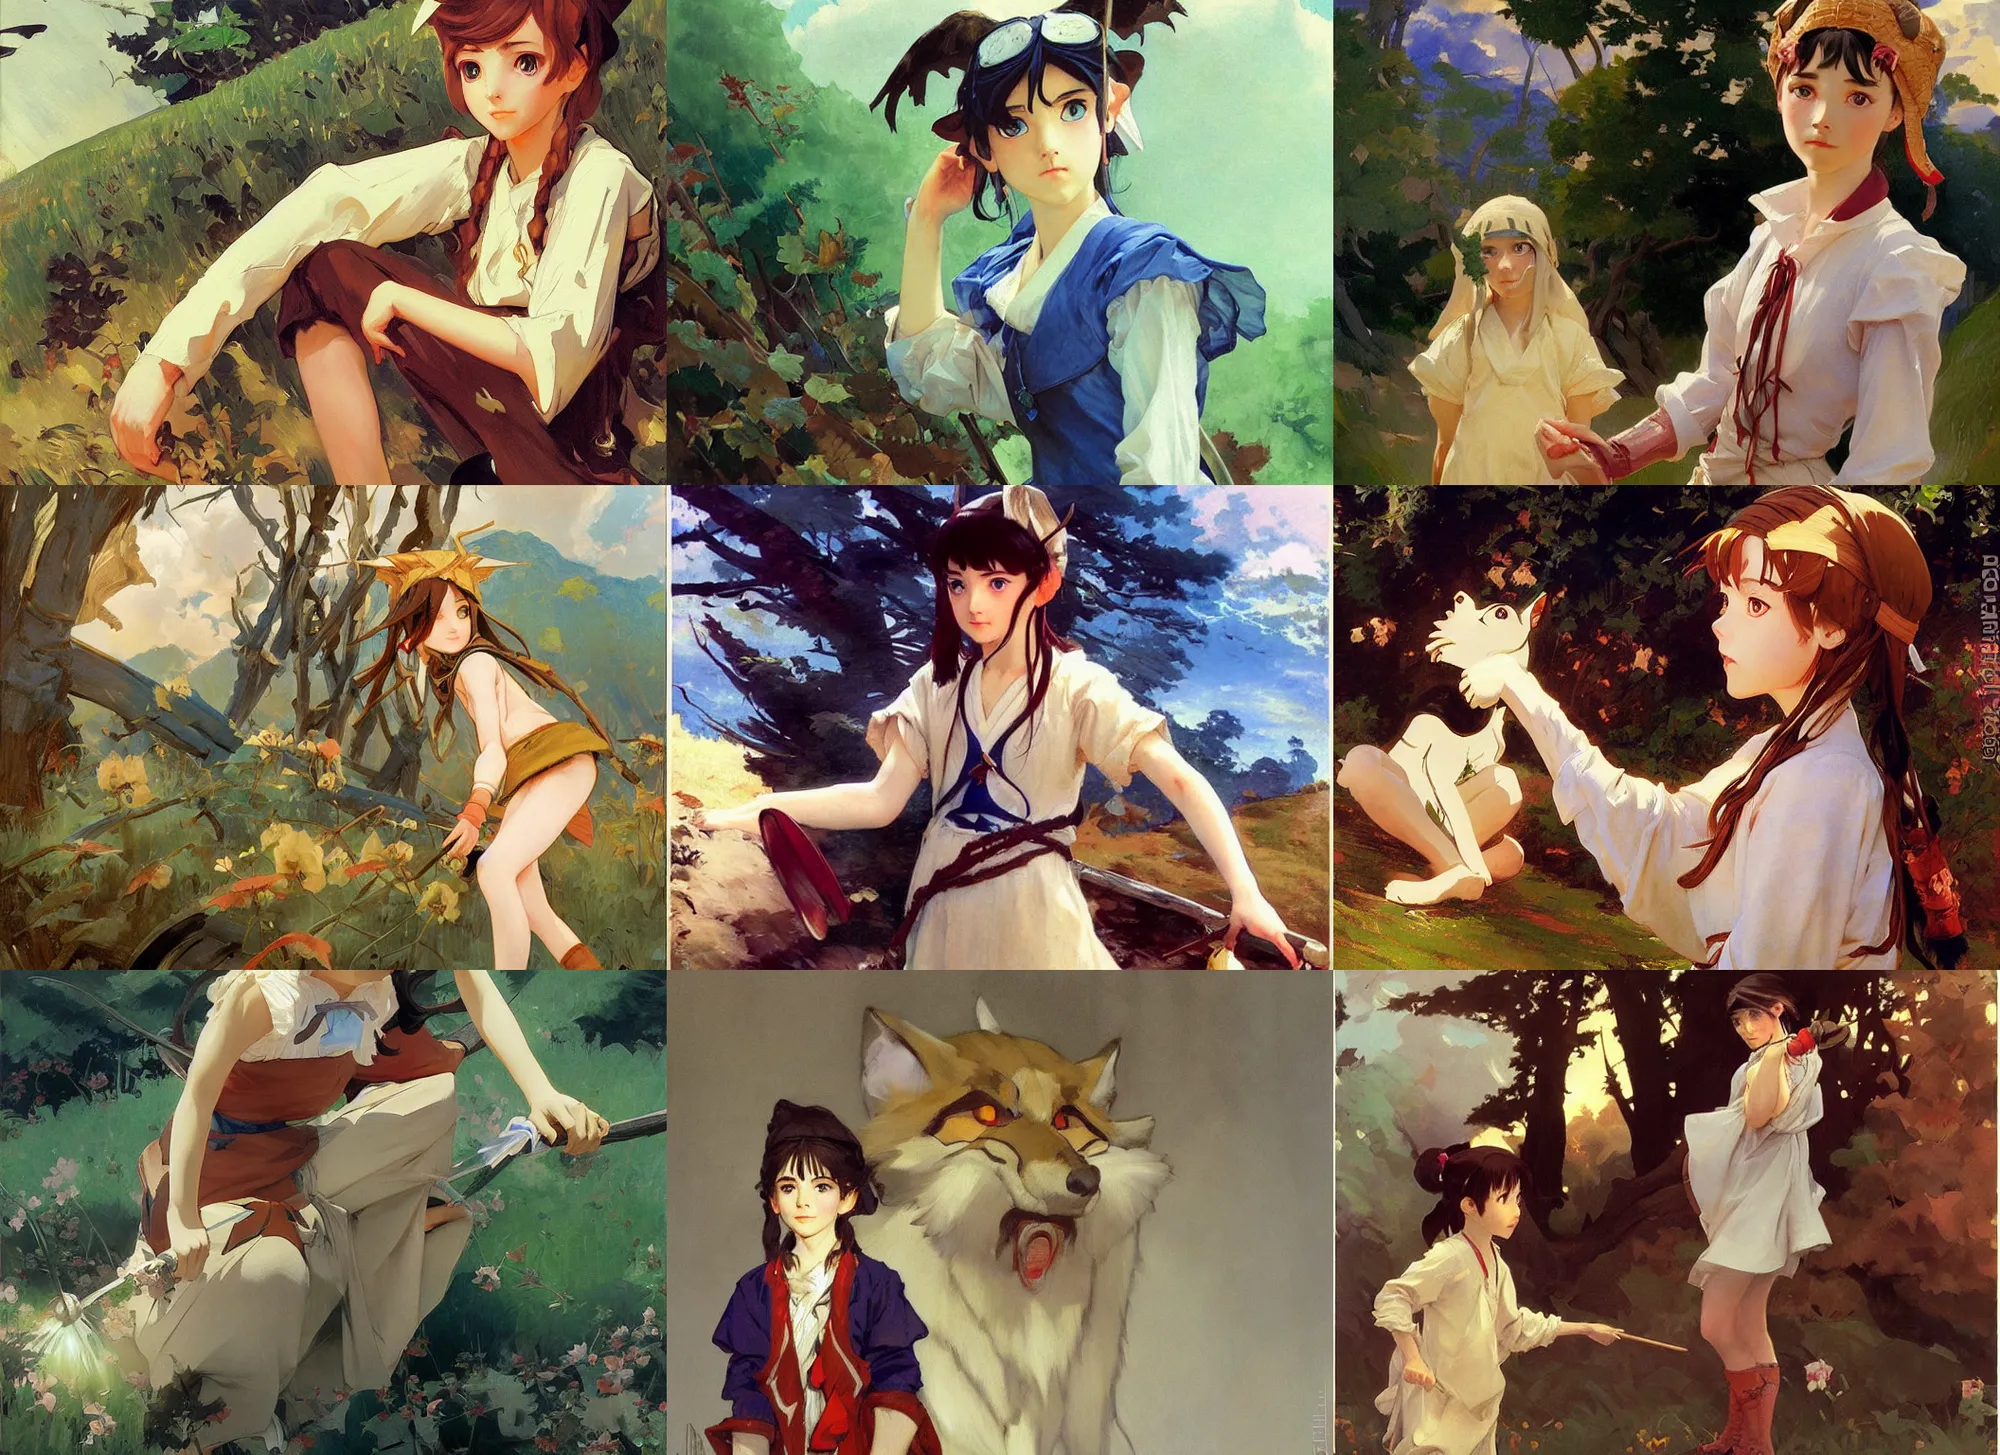 Prompt: painting by sargent and leyendecker and greg hildebrandt savrasov levitan polenov, studio ghibly anime style young girl mononoke, middle earth masterpiece